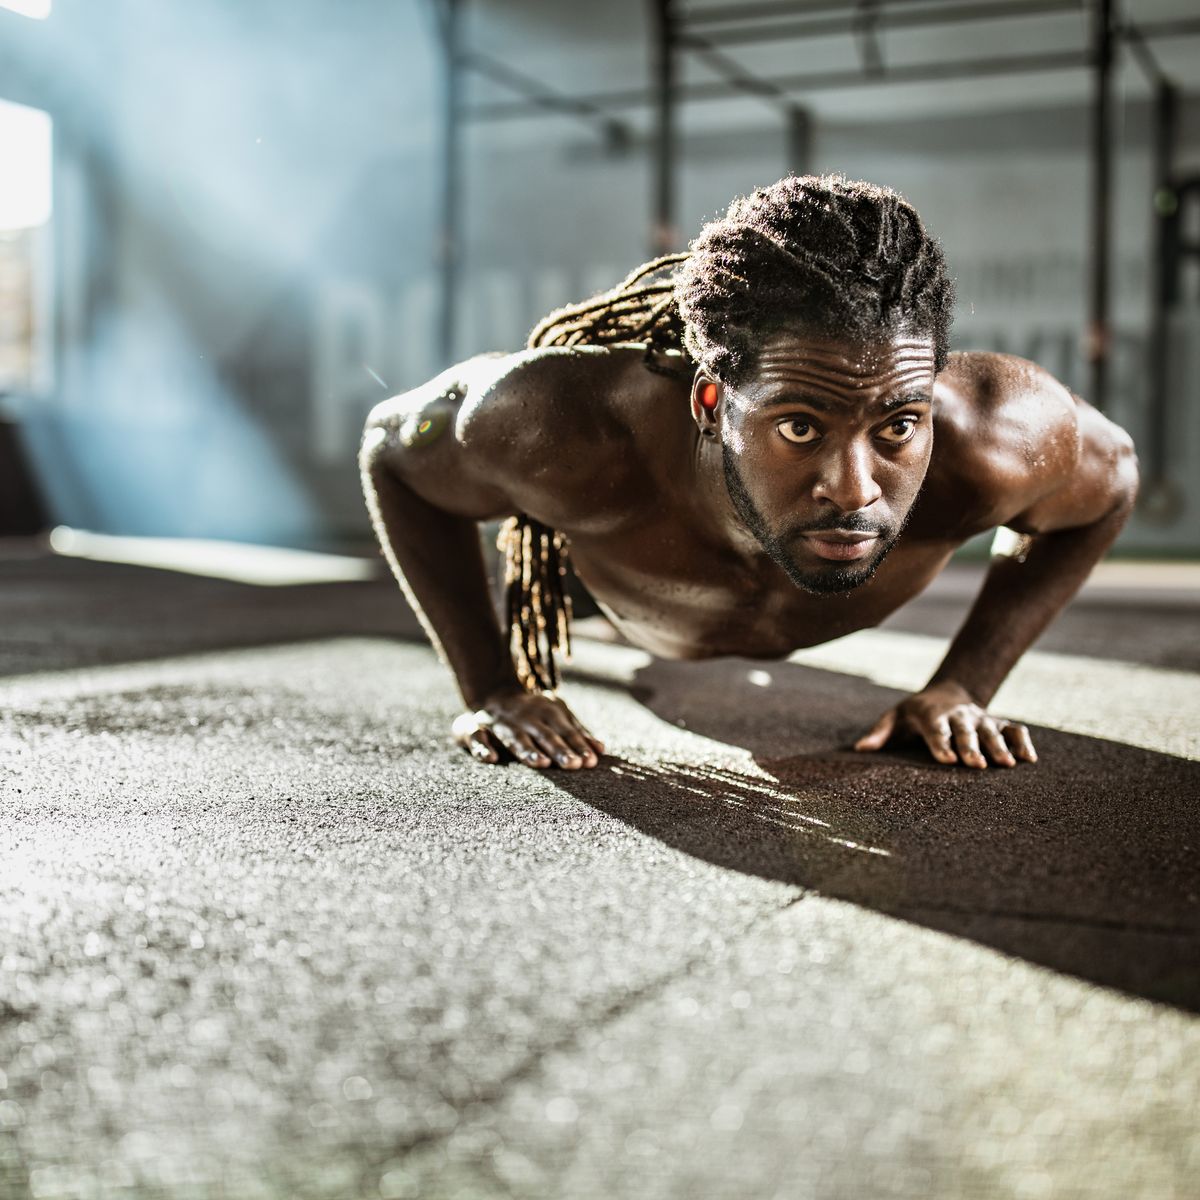 How to Get an Ultra Effective, Full-body Workout from Press-Ups